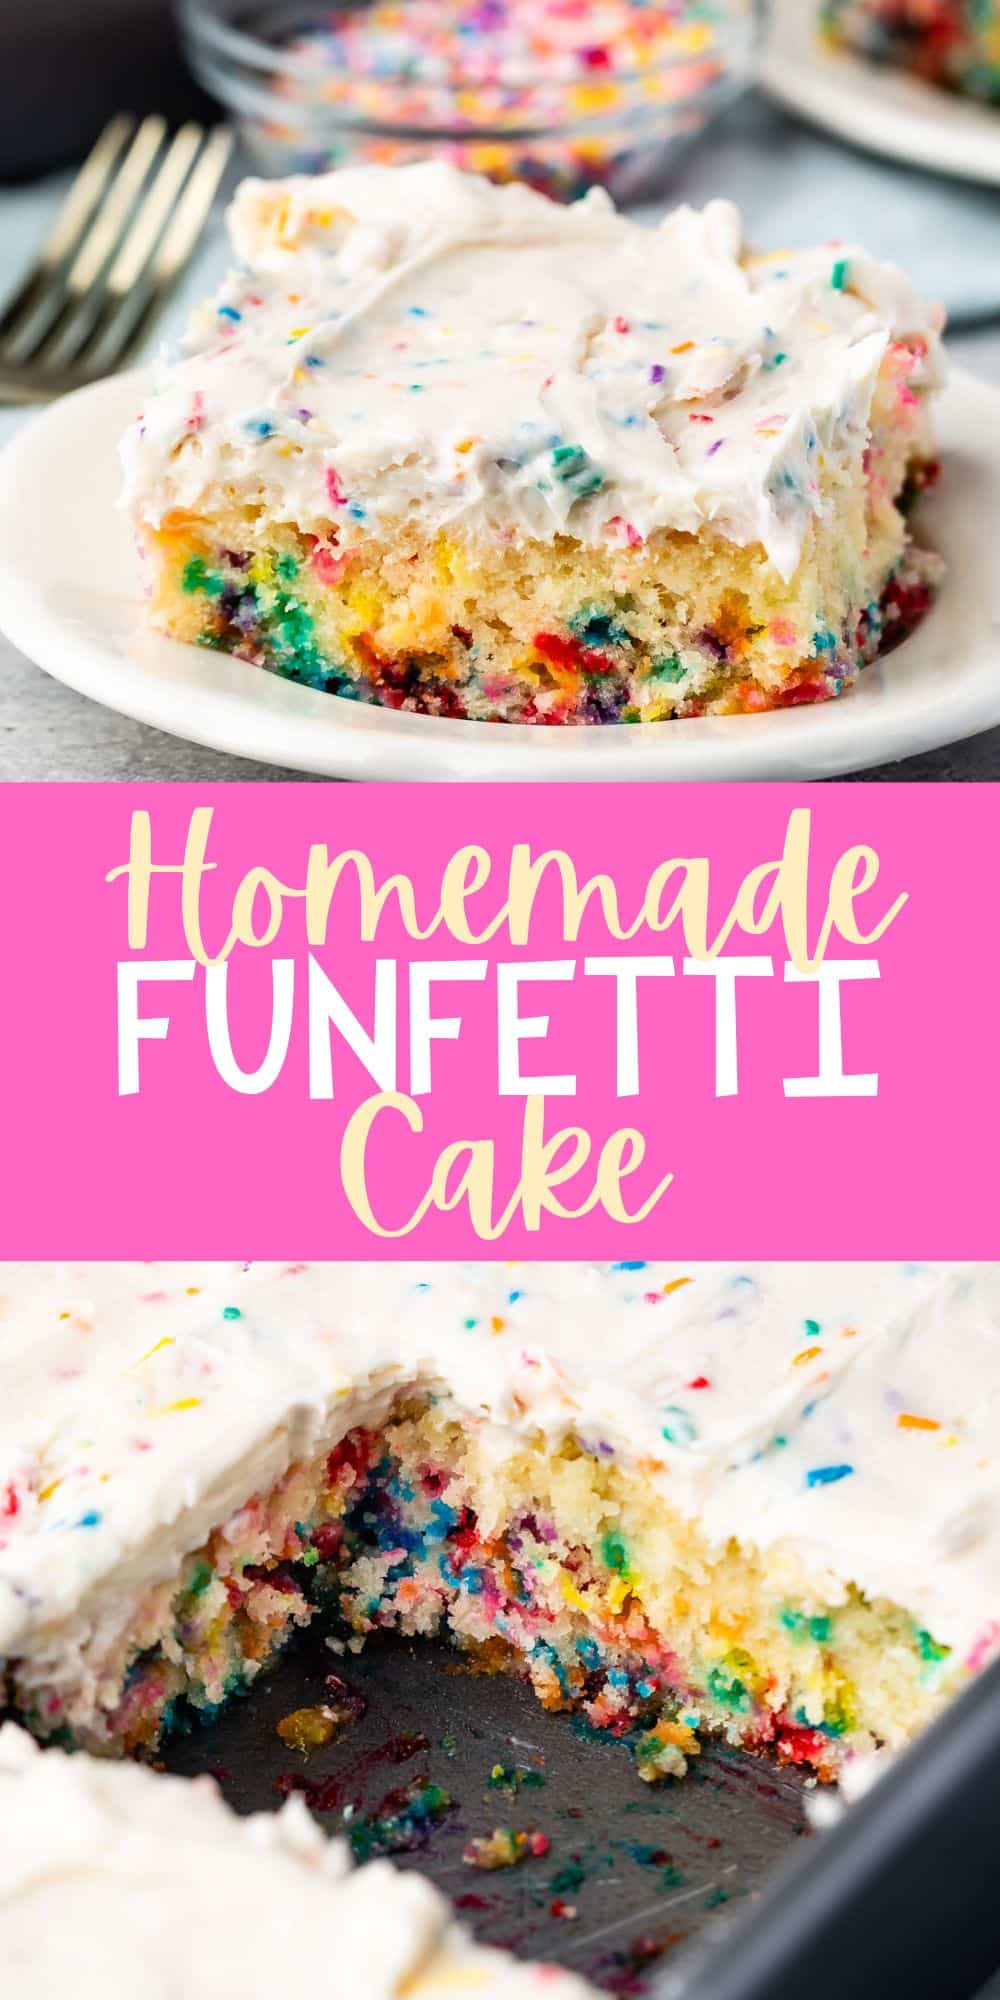 two photos of white cake with colorful sprinkles baked in and white frosting with more sprinkles mixed in on top with words on the image.